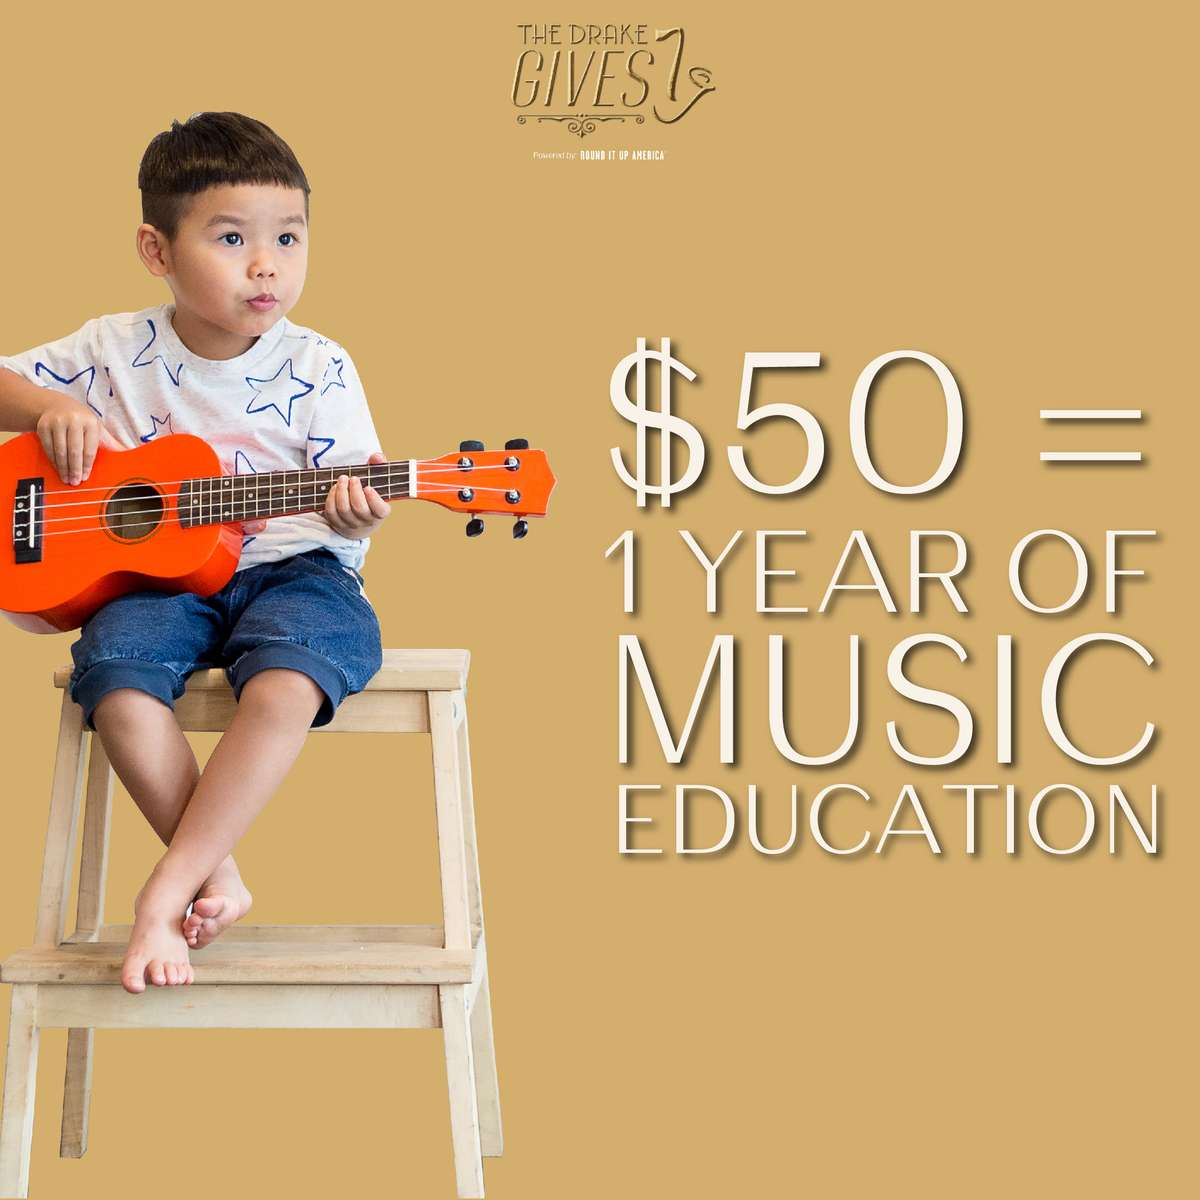 Your donation is making a direct impact in a kid's life by gifting them music education. The influence of music can benefit brain development in early childhood – including motor, listening, reading and emotional skills.